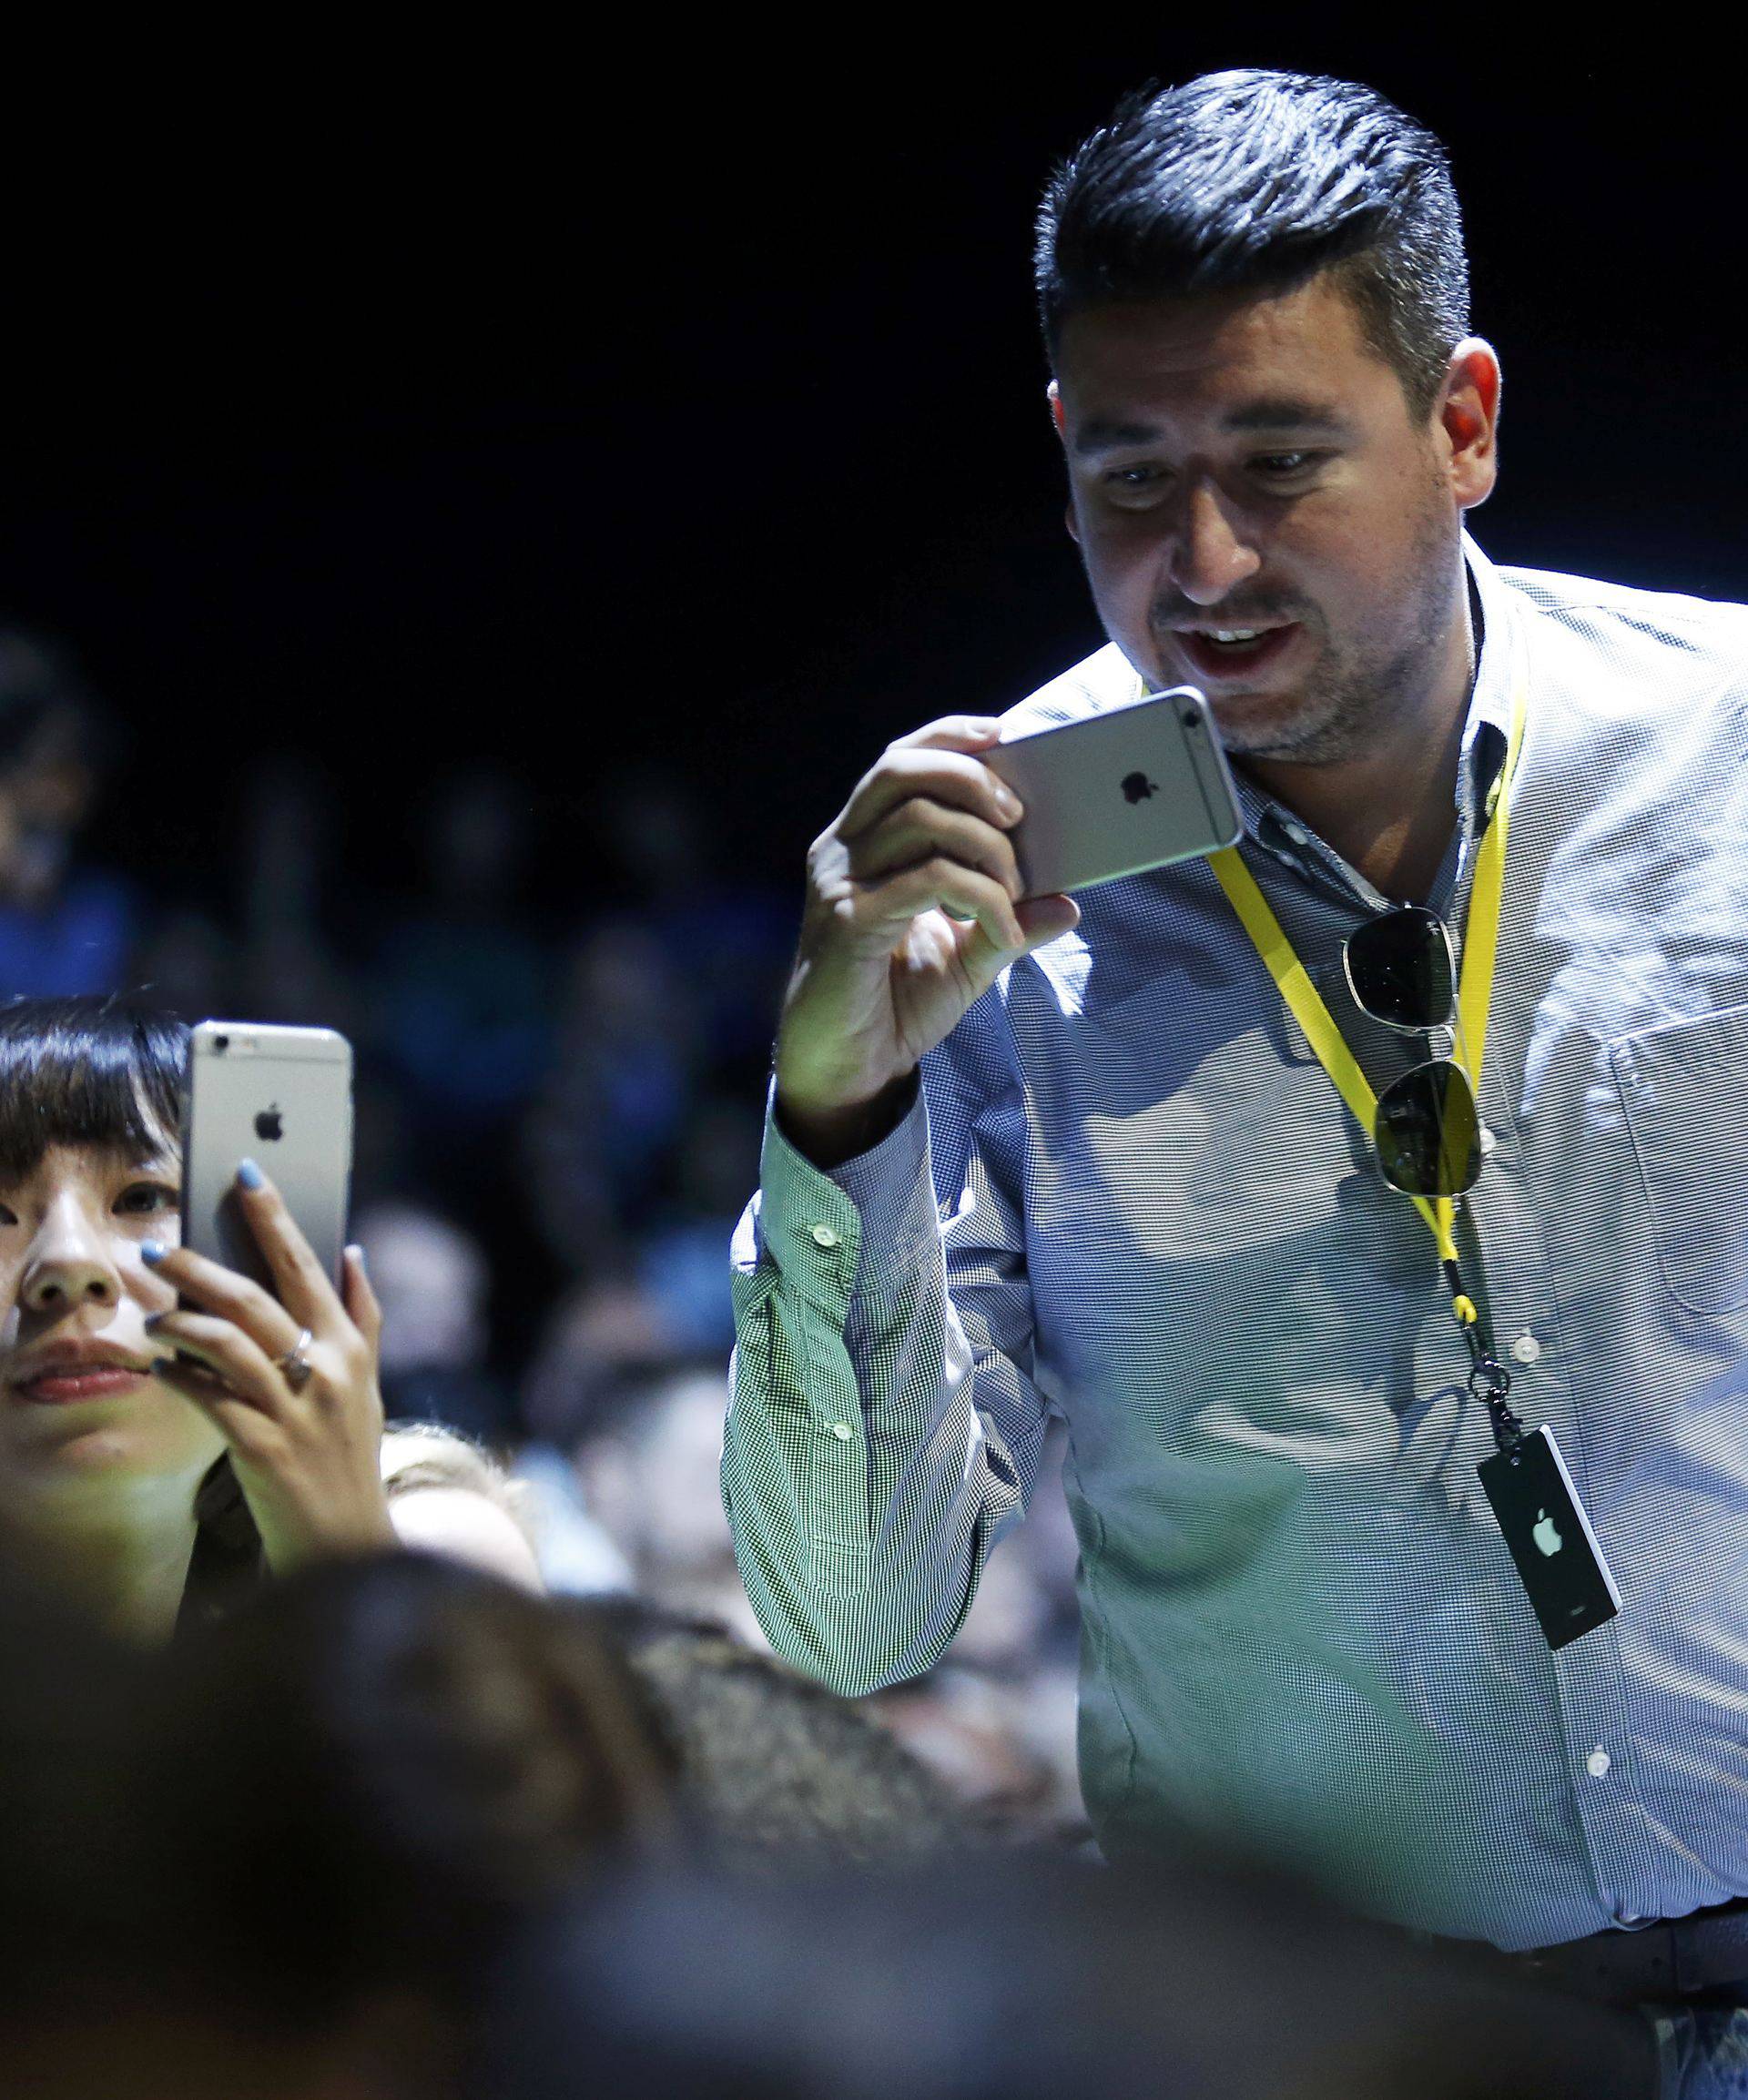 Attendees use their iPhones during an Apple media event in San Francisco